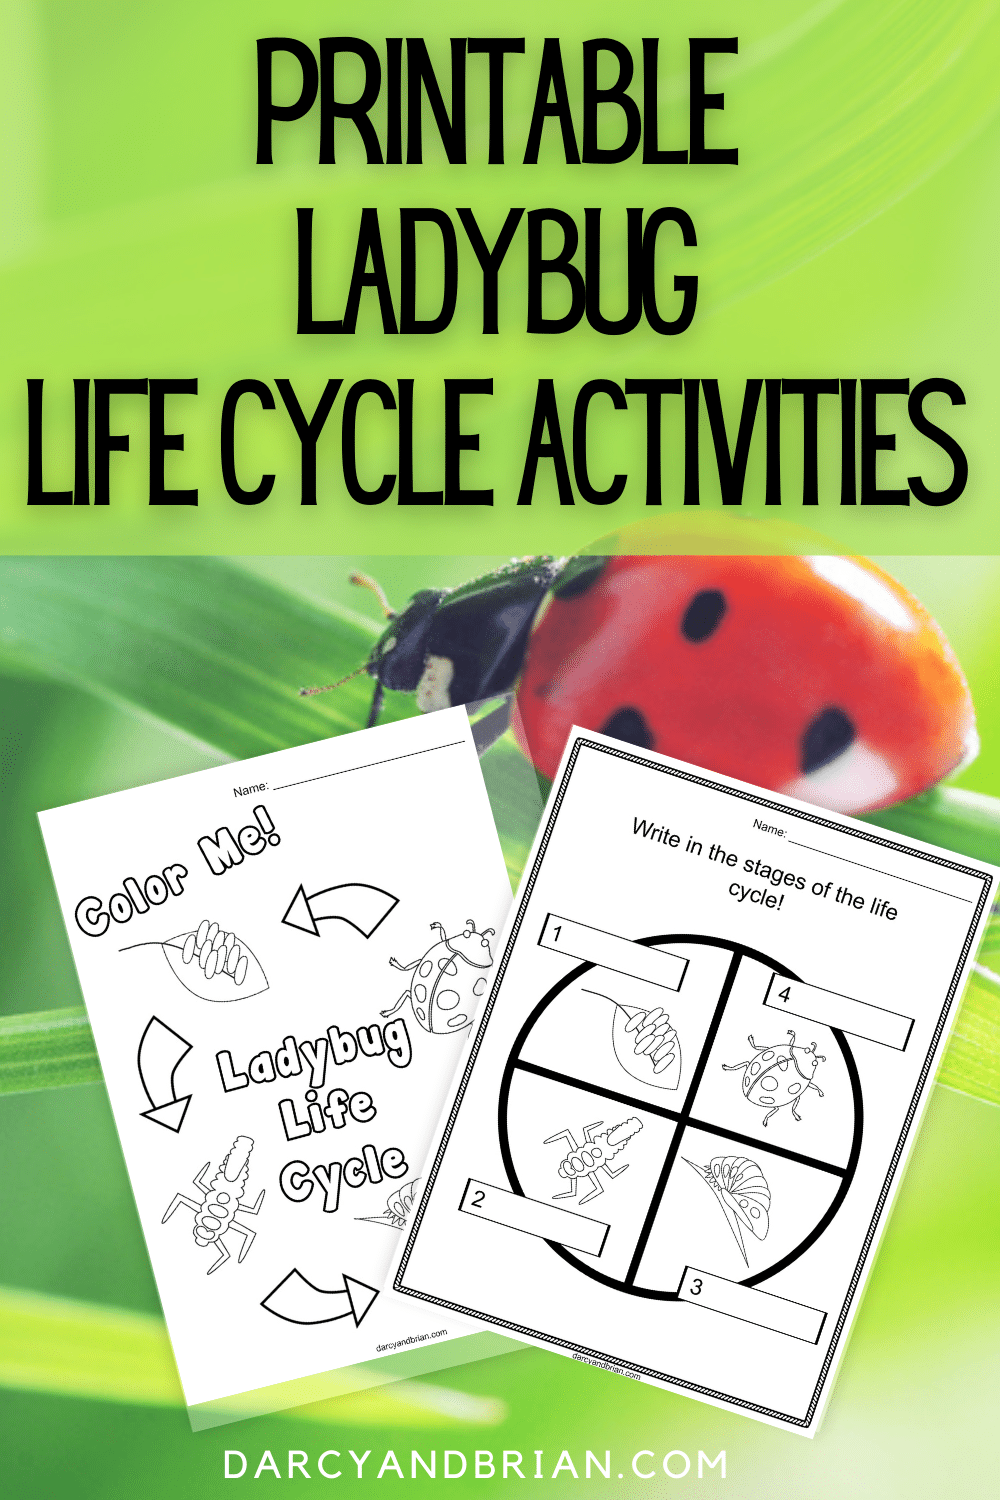 Black text on green background at top reads: Printable Ladybug Life Cycle Activities. Preview of two of the printable worksheets on a ladybug crawling on grass in background.